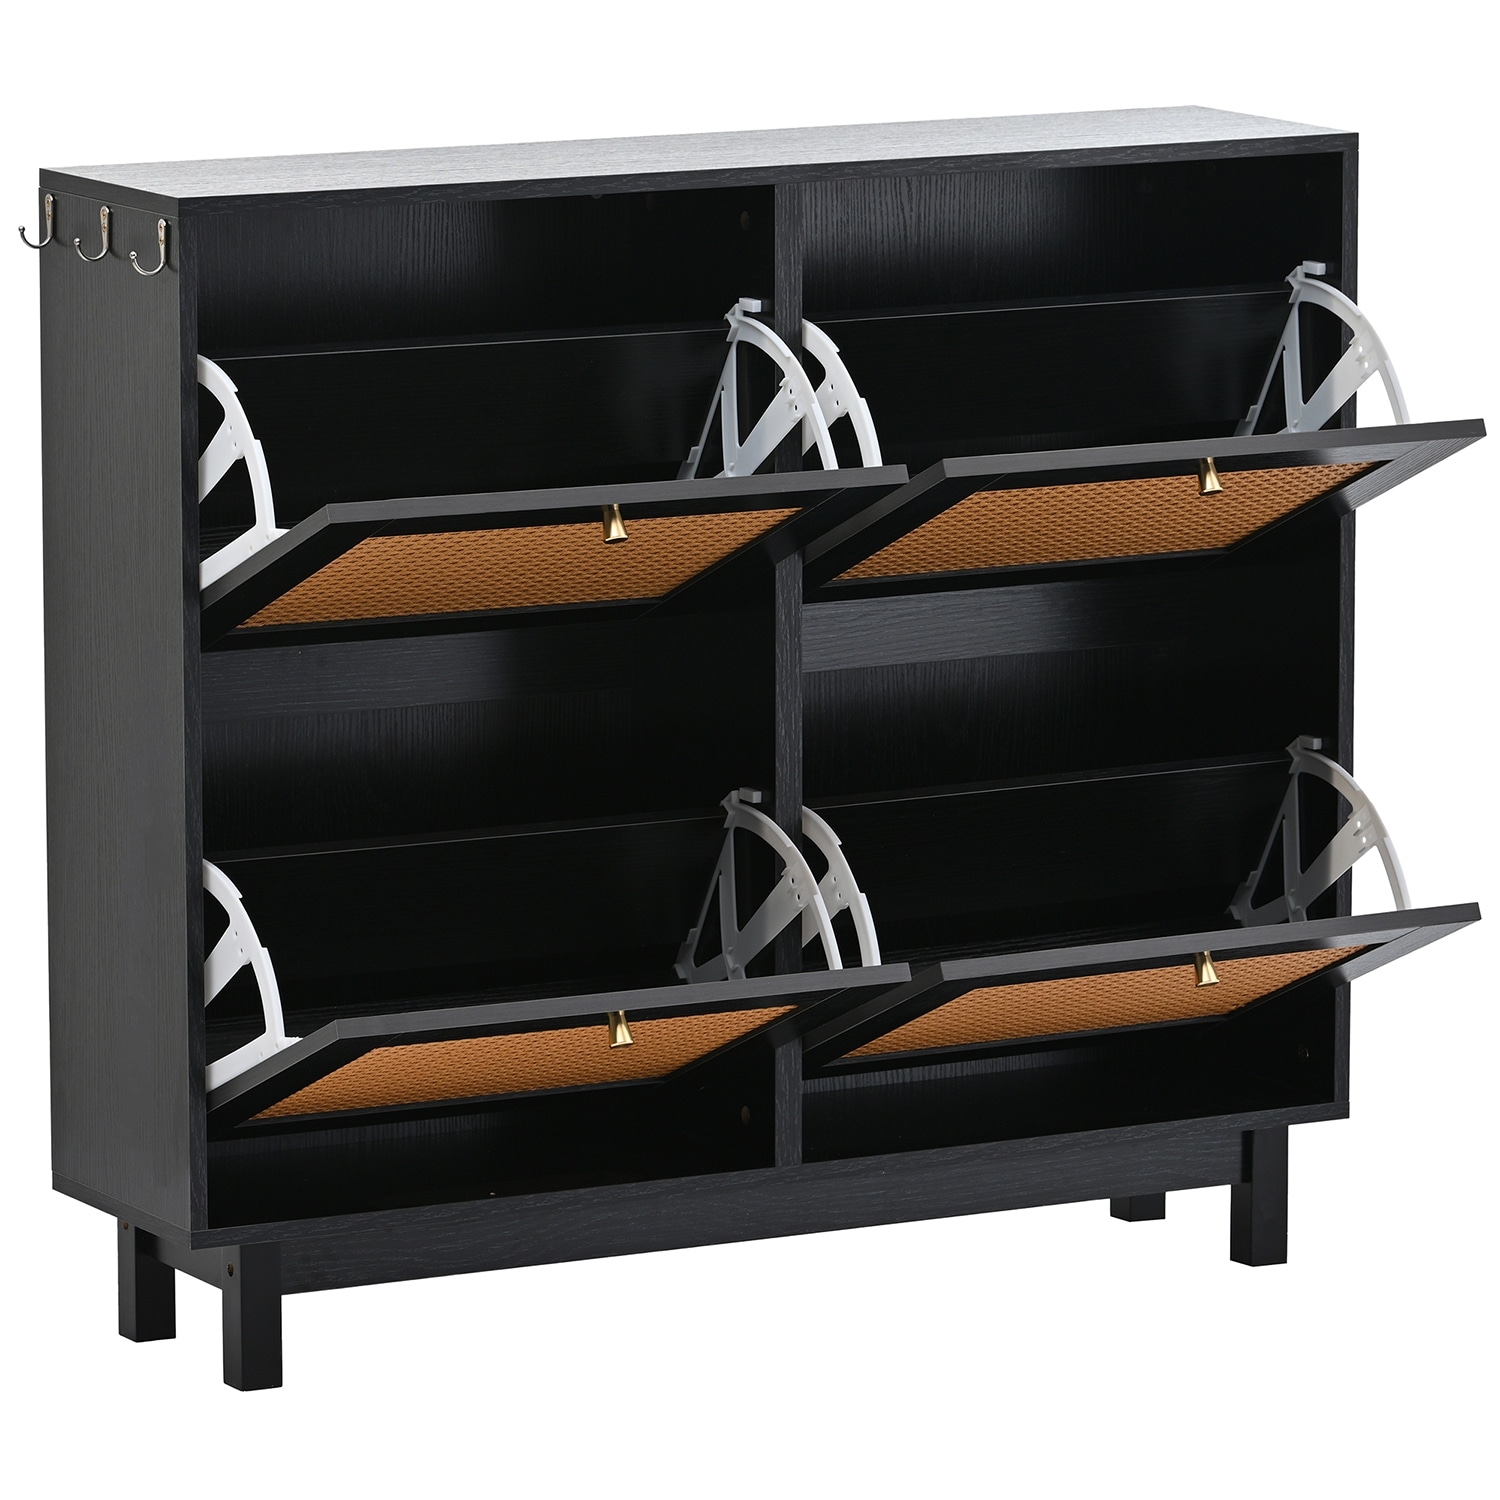 https://ak1.ostkcdn.com/images/products/is/images/direct/cffe70826f3ce2cb6562ca3e7ddf75401db3b9c9/Shoe-Cabinet-with-4-Flip-Drawers%2C2-Tier-Shoe-Storage-Organizer.jpg